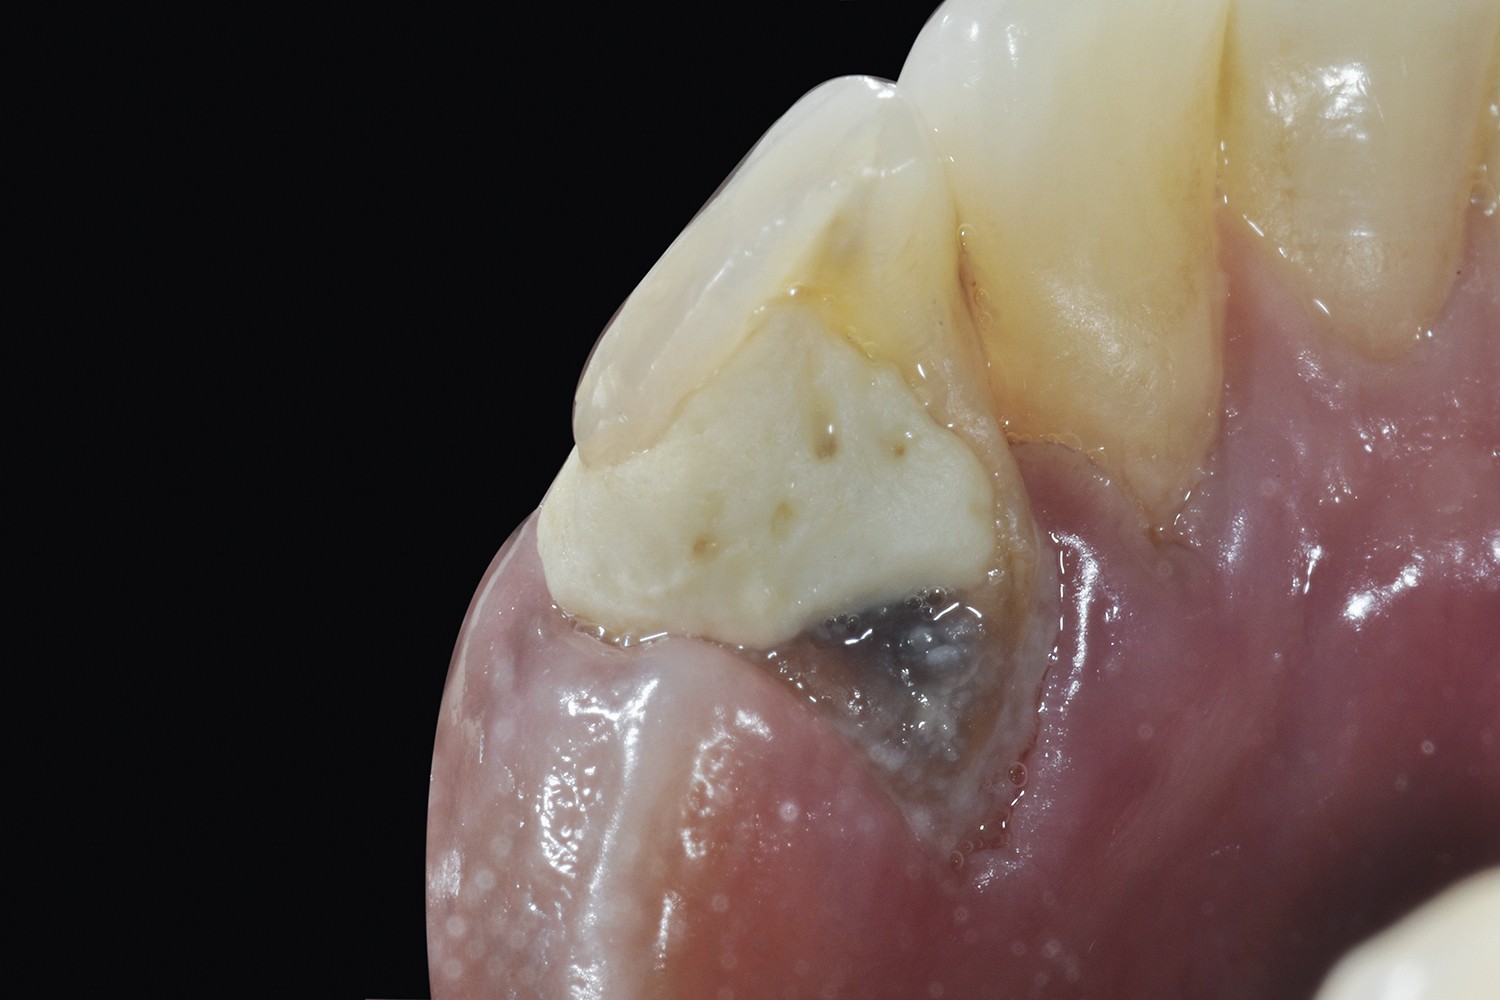 Relevance of the cast metallic posts in a PPR based tooth